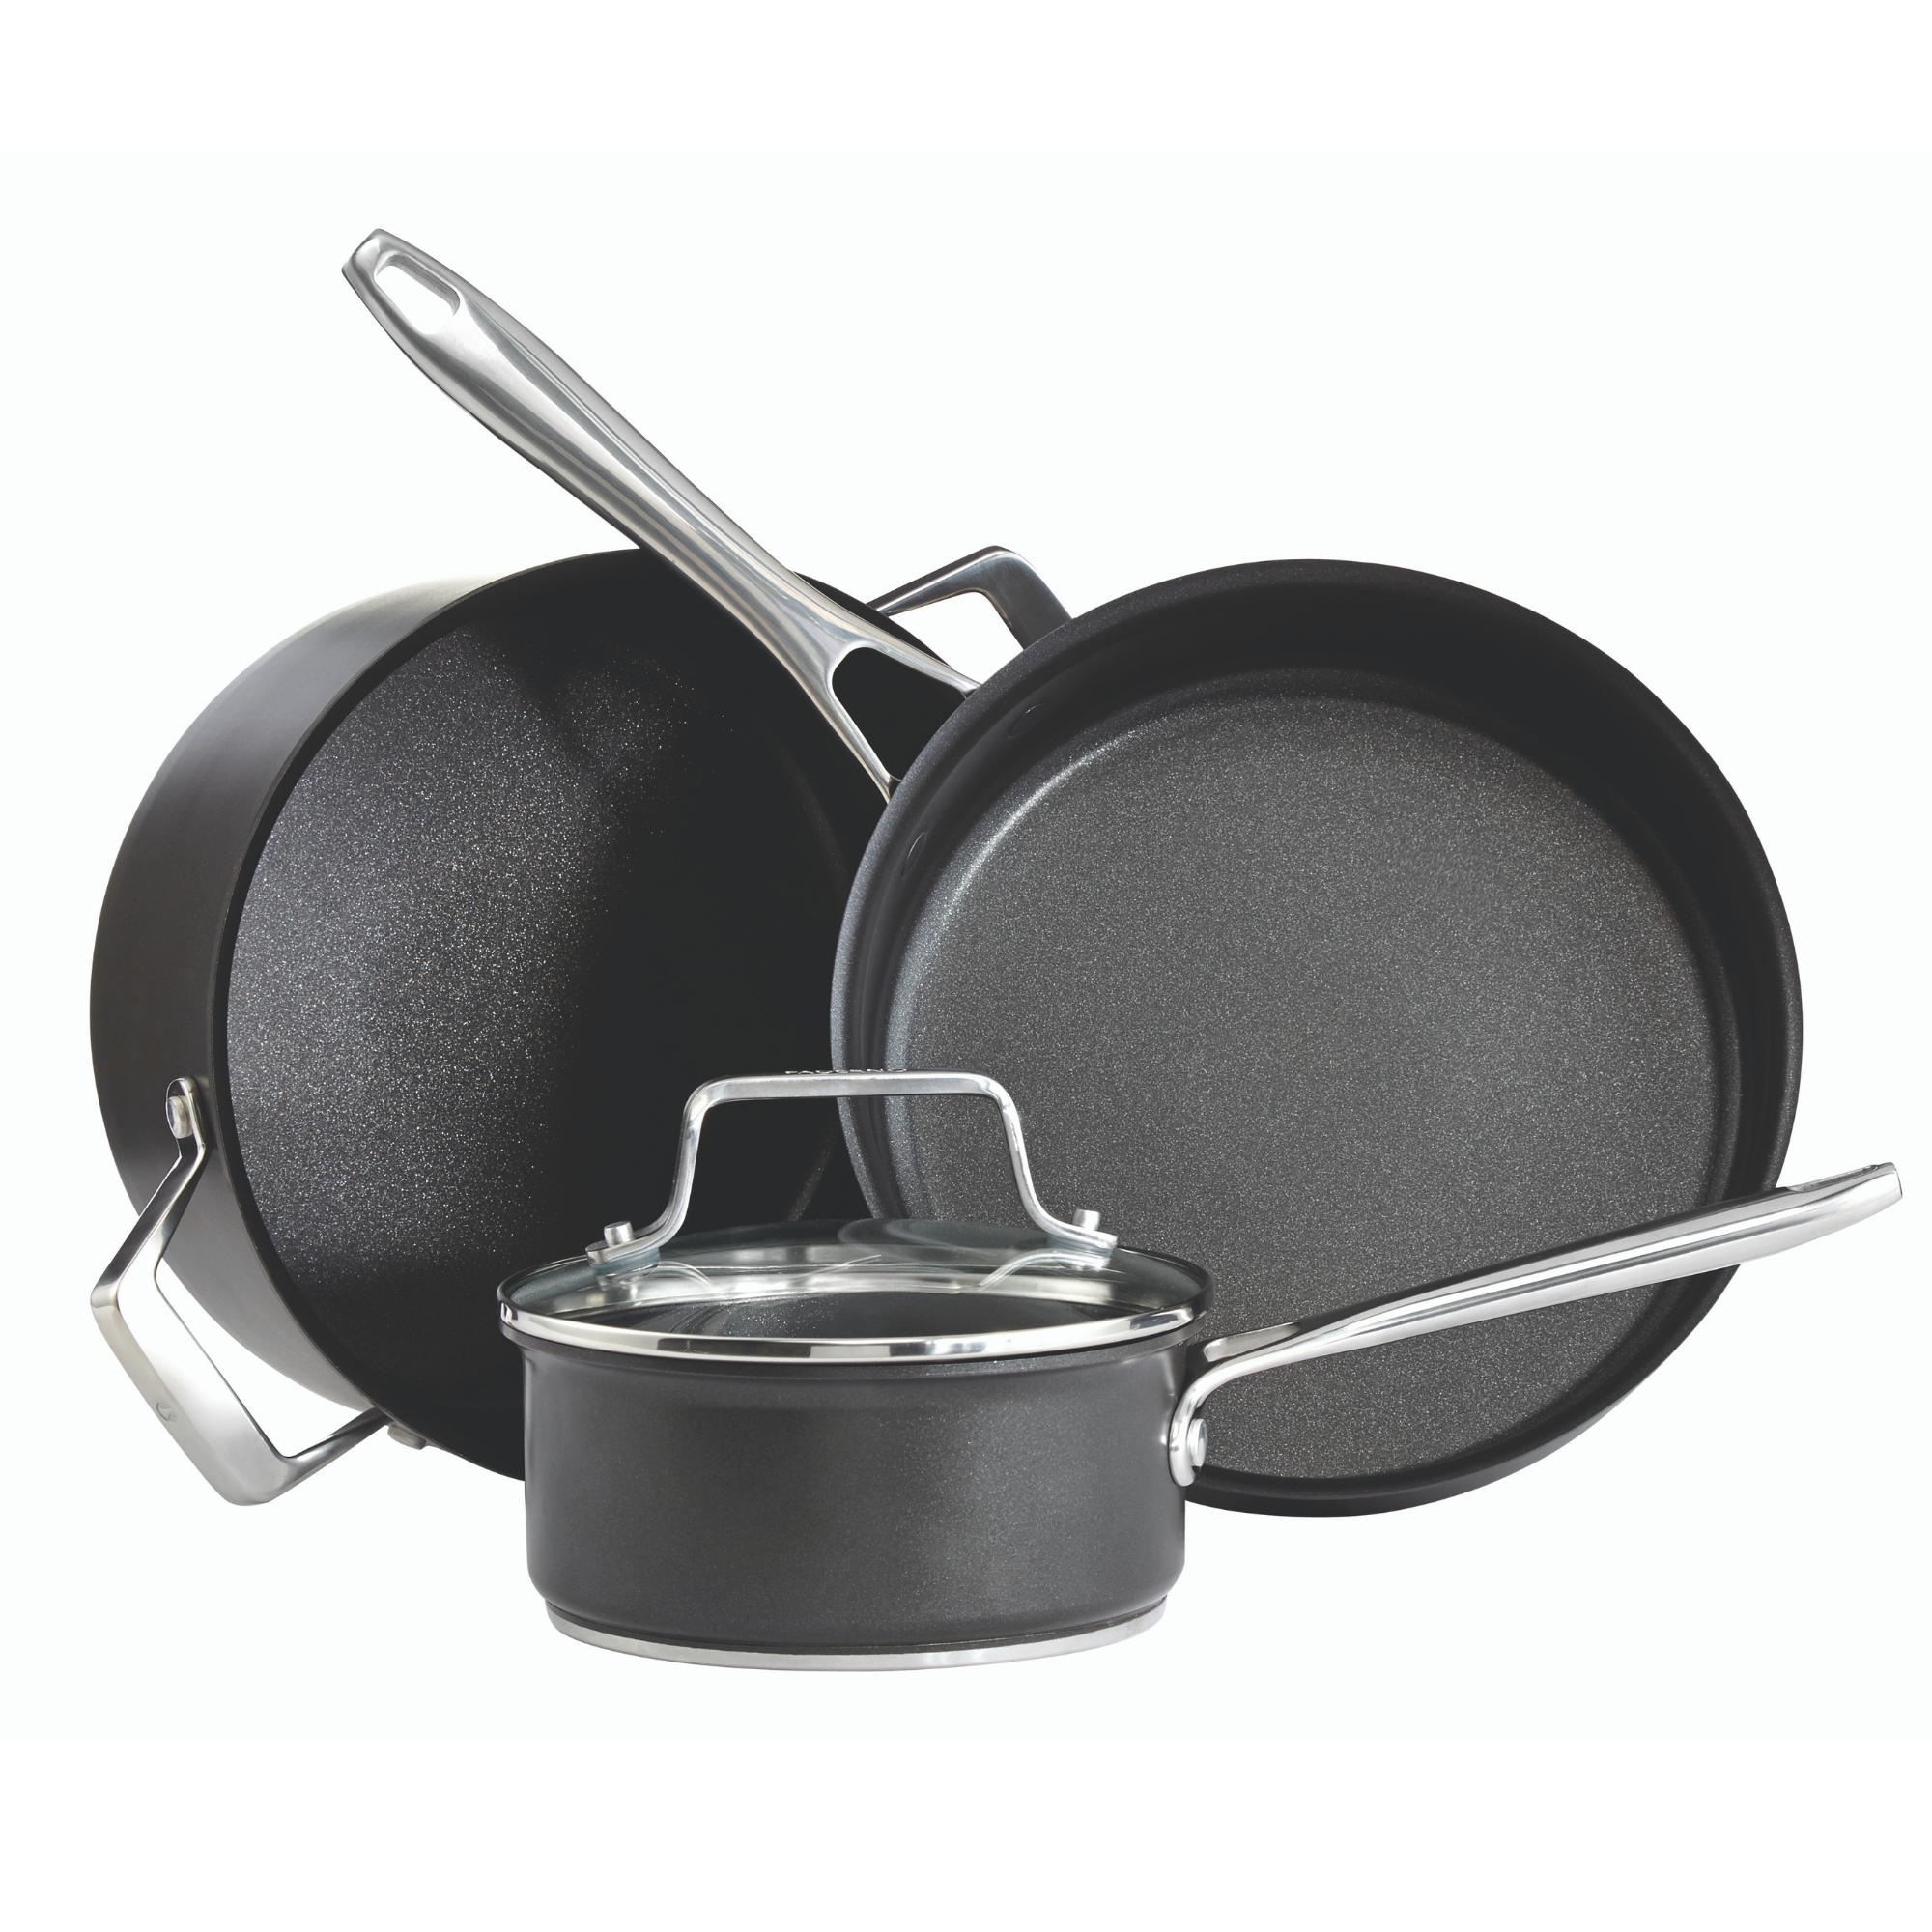 Non-stick French omelet pan, Paderno